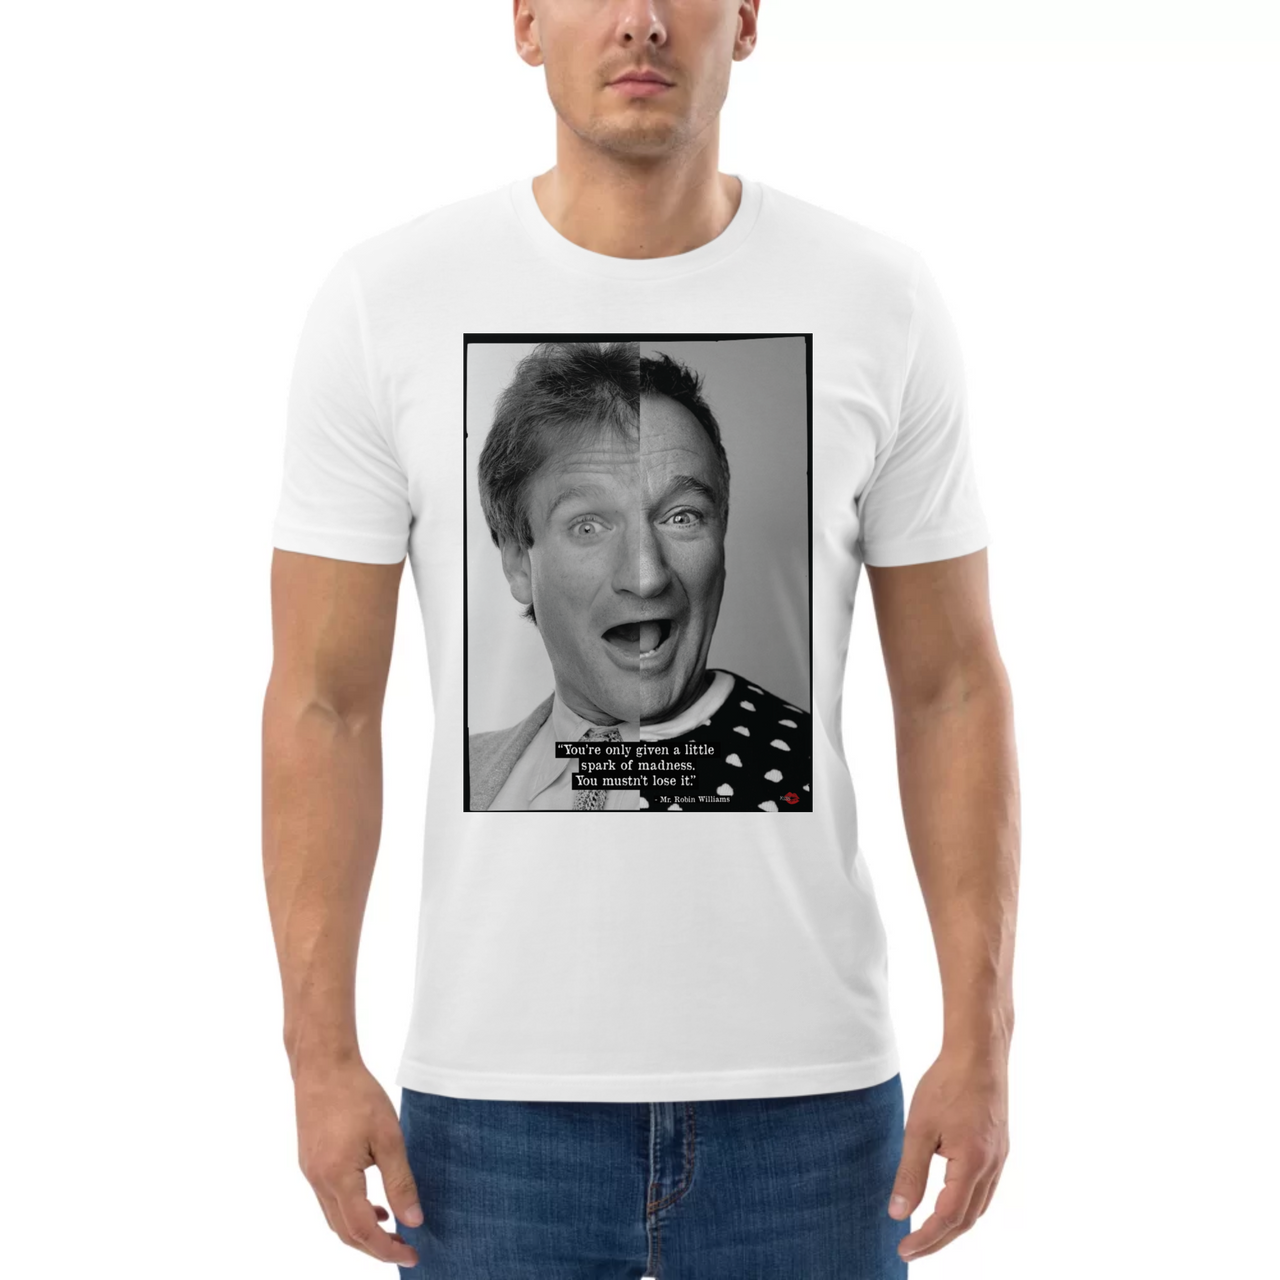 Robin Williams Then & Now KiSS T-Shirt - Quote Madness - Hollywood Icon - Movie Legend